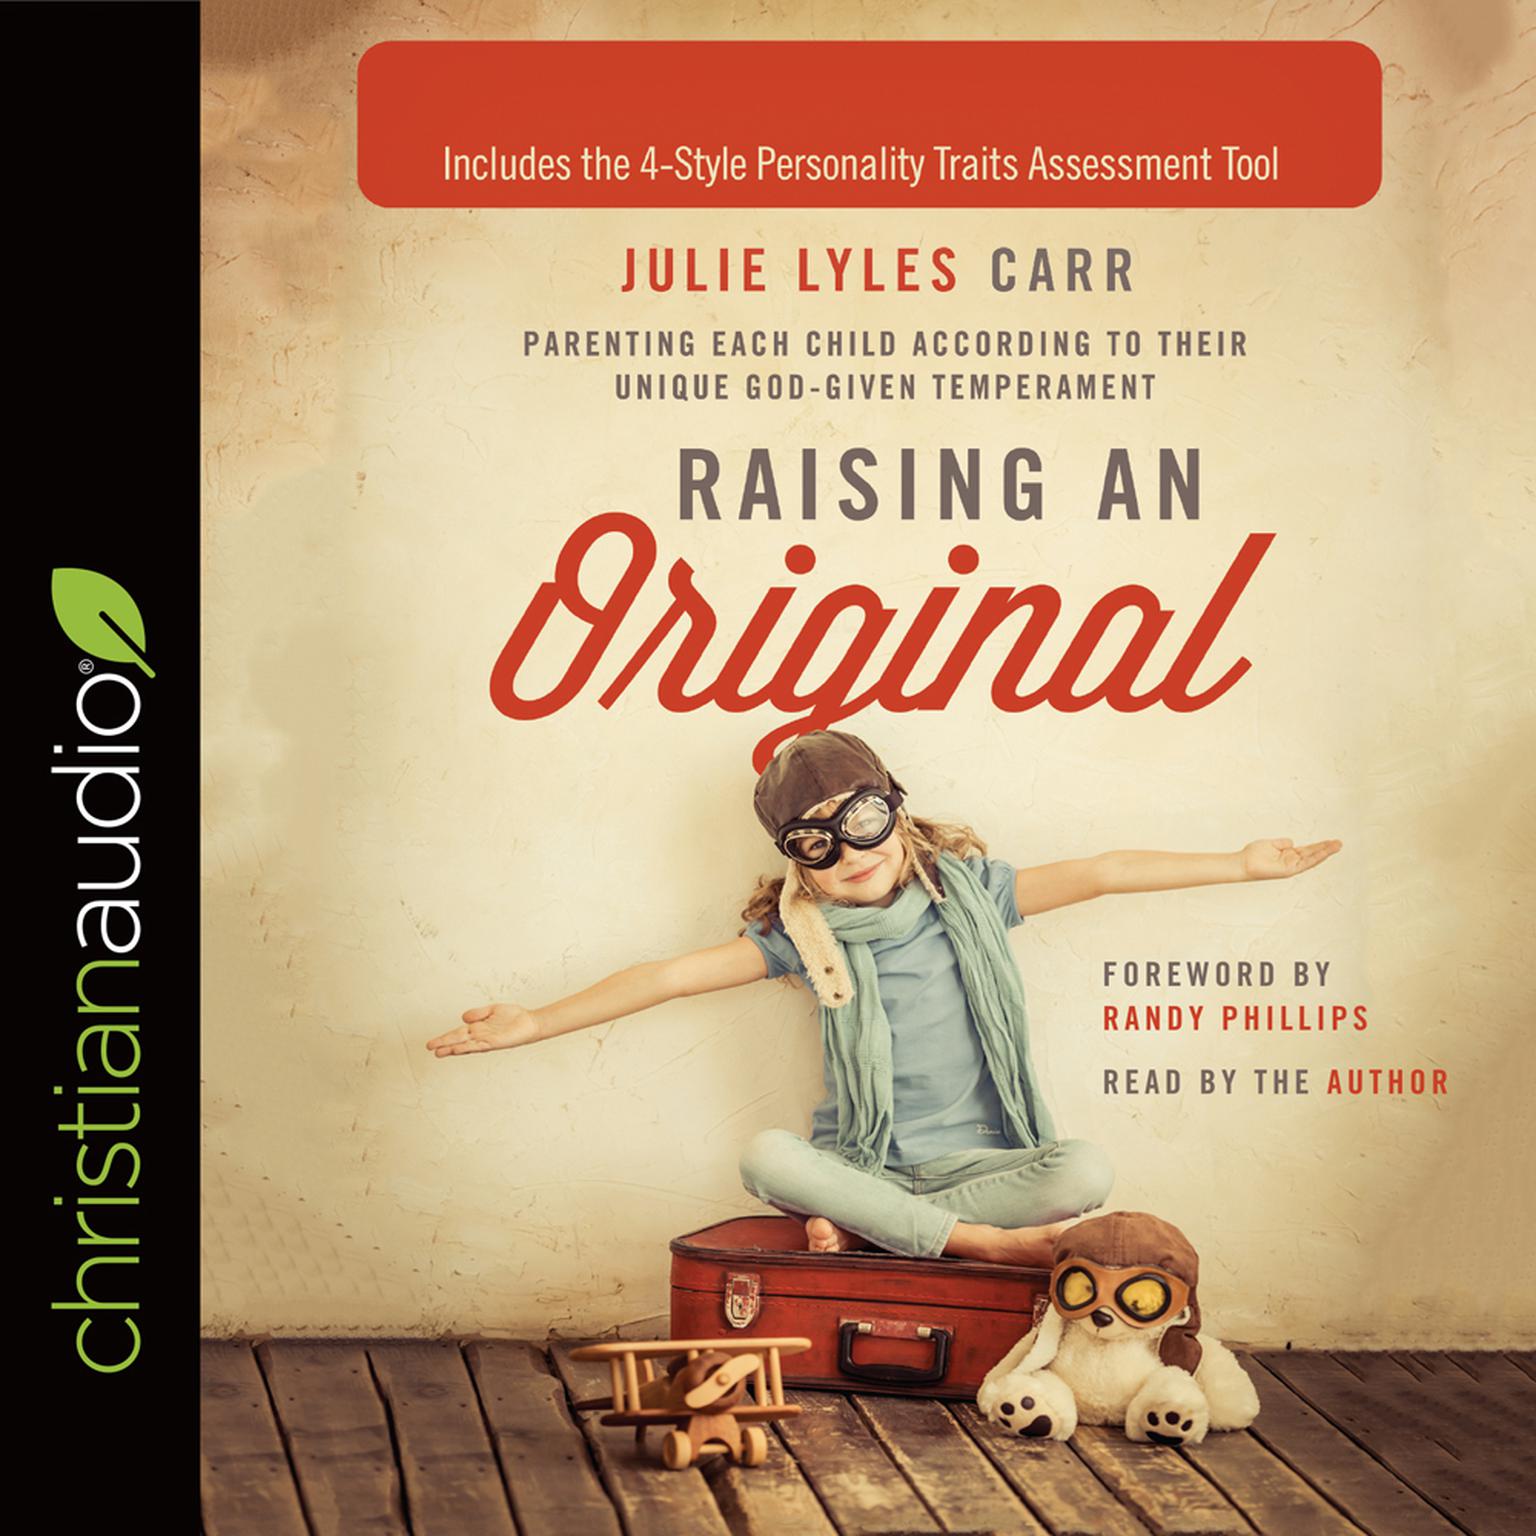 Raising an Original: Parenting Each Child According to their Unique God-Given Temperament Audiobook, by Julie Lyles Carr